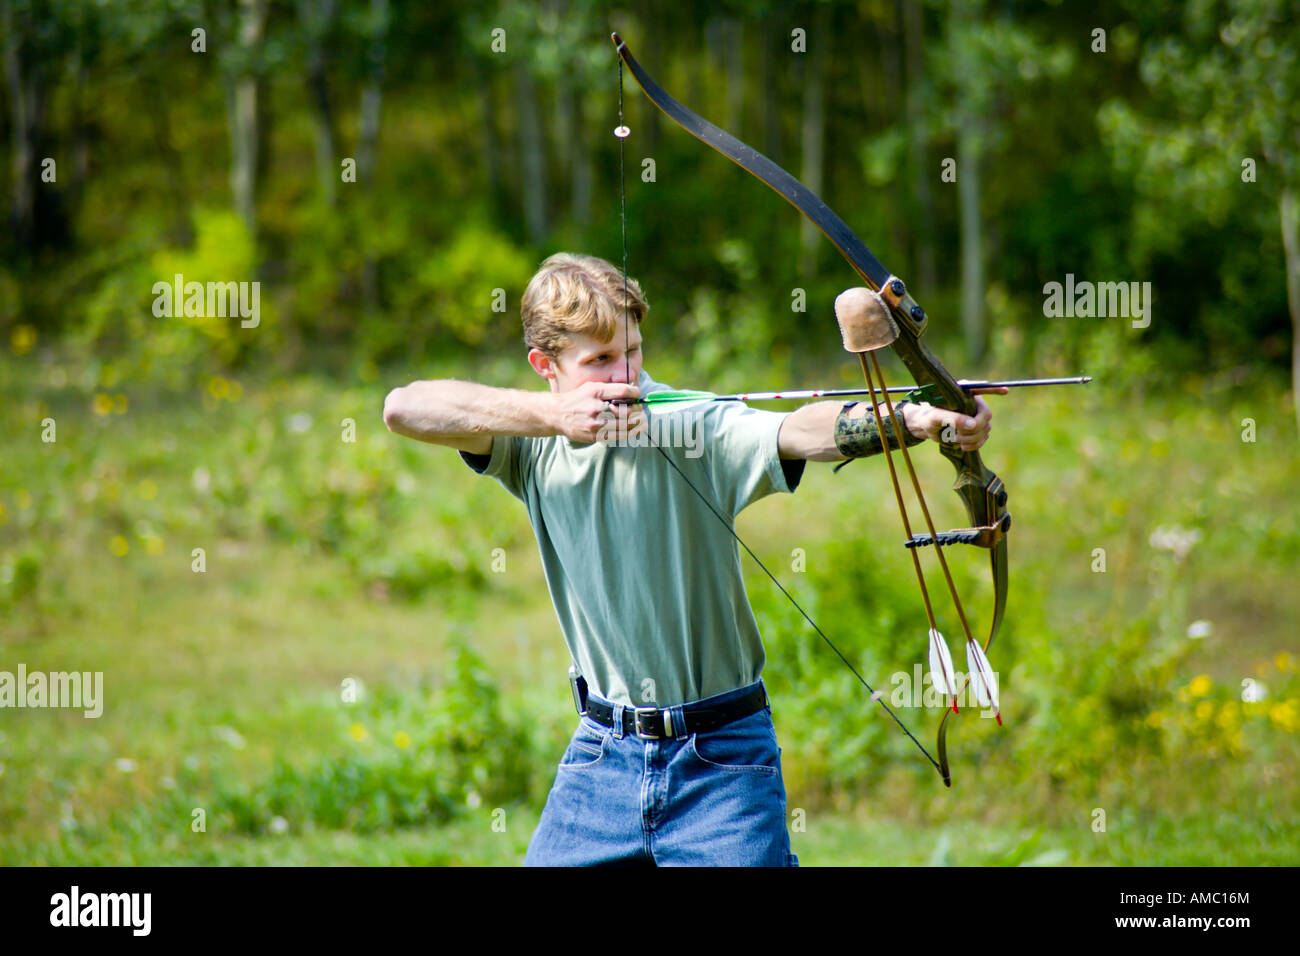 A Young Man 20 S Shooting Archery Using A Traditional Bow And Arrow Recurve And Feathers Stock 9024